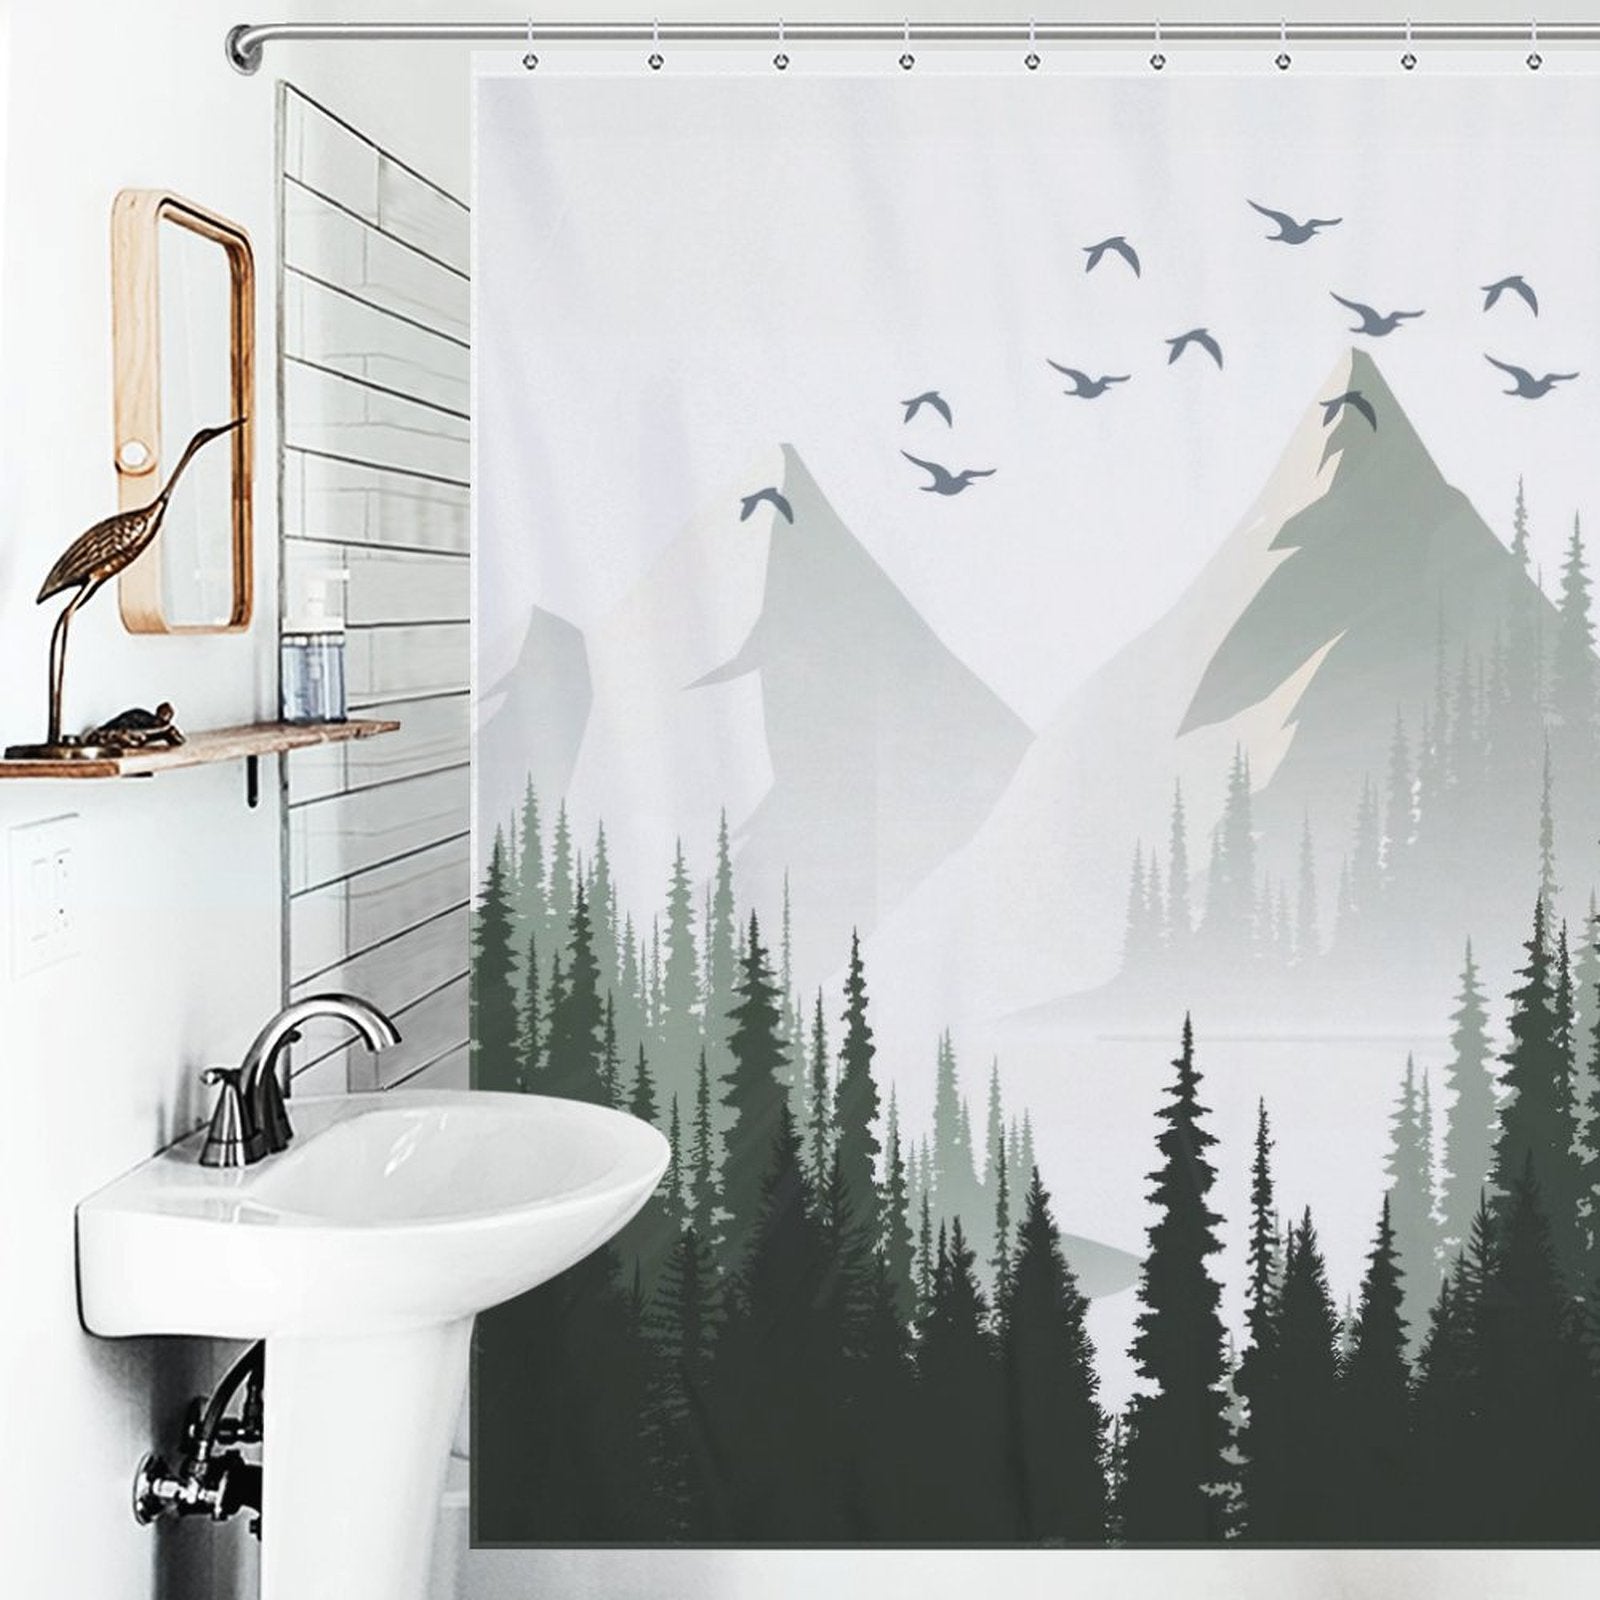 Bathroom with a sink, wall mirror, and a Green Misty Forest Shower Curtain Ombre Sage Green White Nature Tree Mountain Woodland-Cottoncat. The nature scene bathroom decor by Cotton Cat creates a serene and tranquil atmosphere.